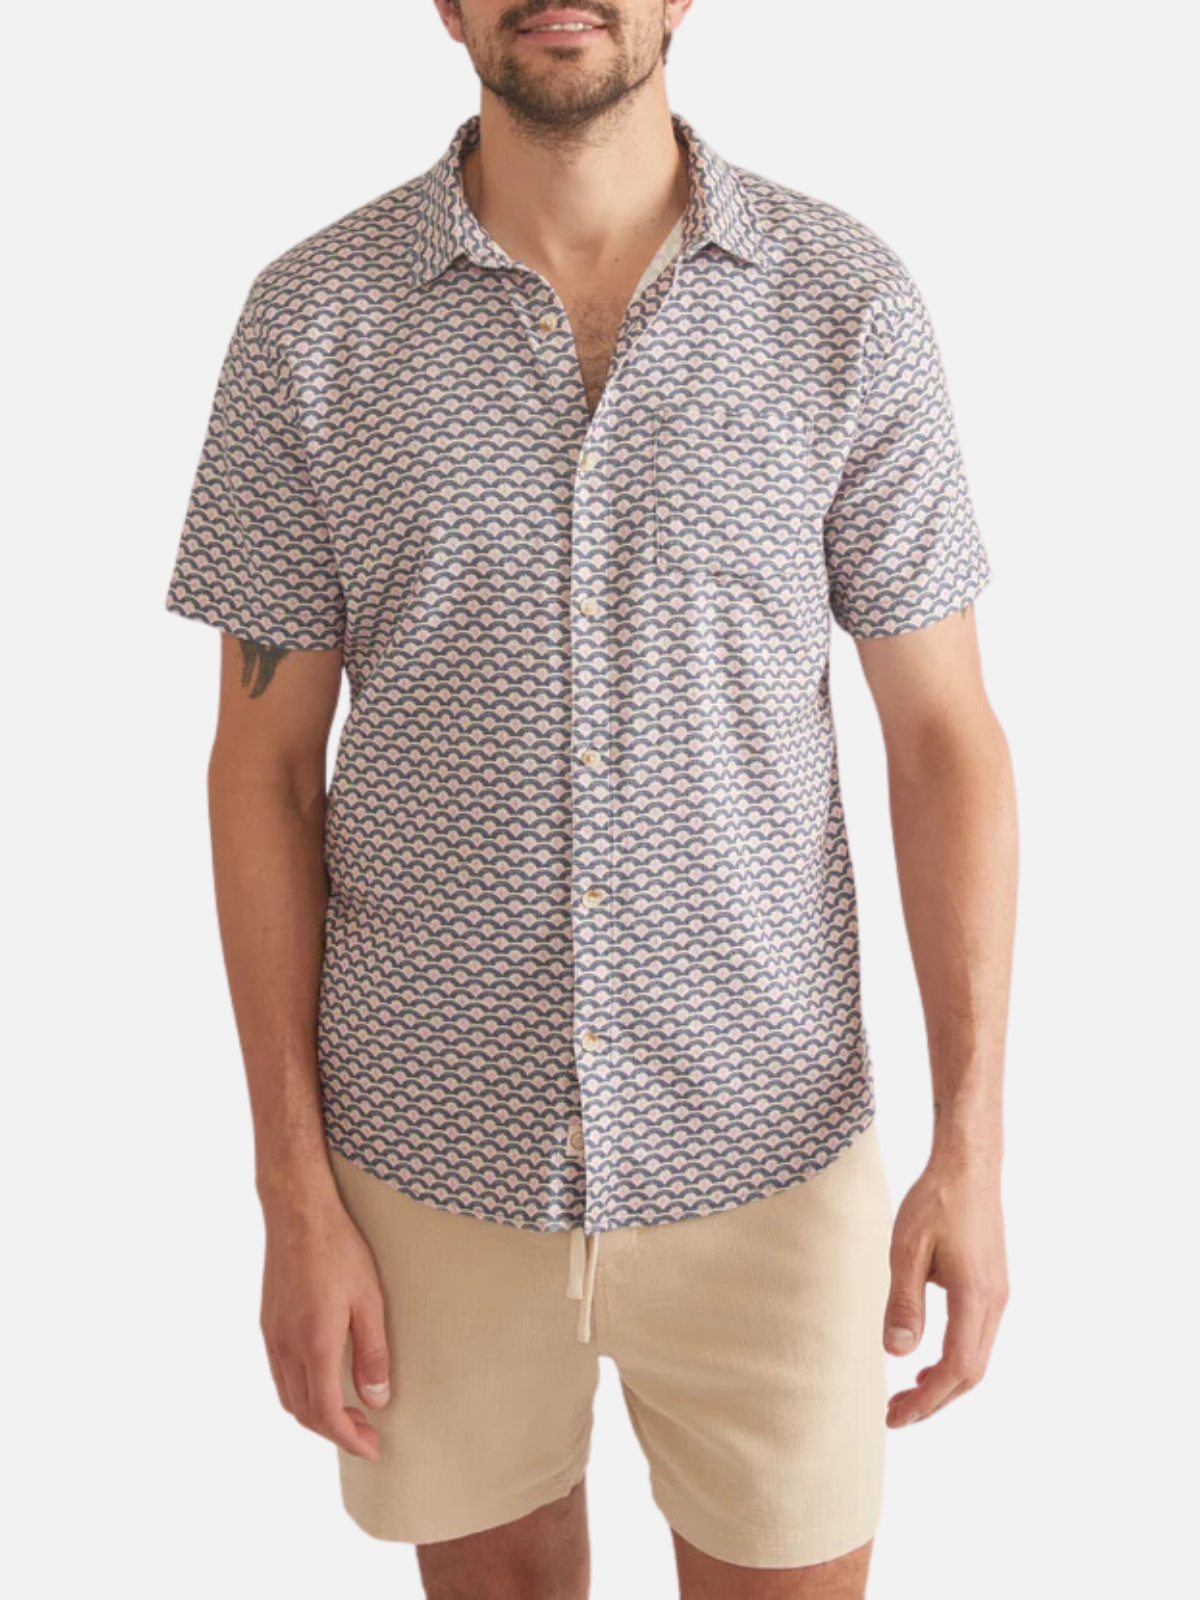  marine layer classic stretch selvage shirt ss short sleeve button up japanese wave print blue violet pink purple white kempt athens ga georgia men's clothing store